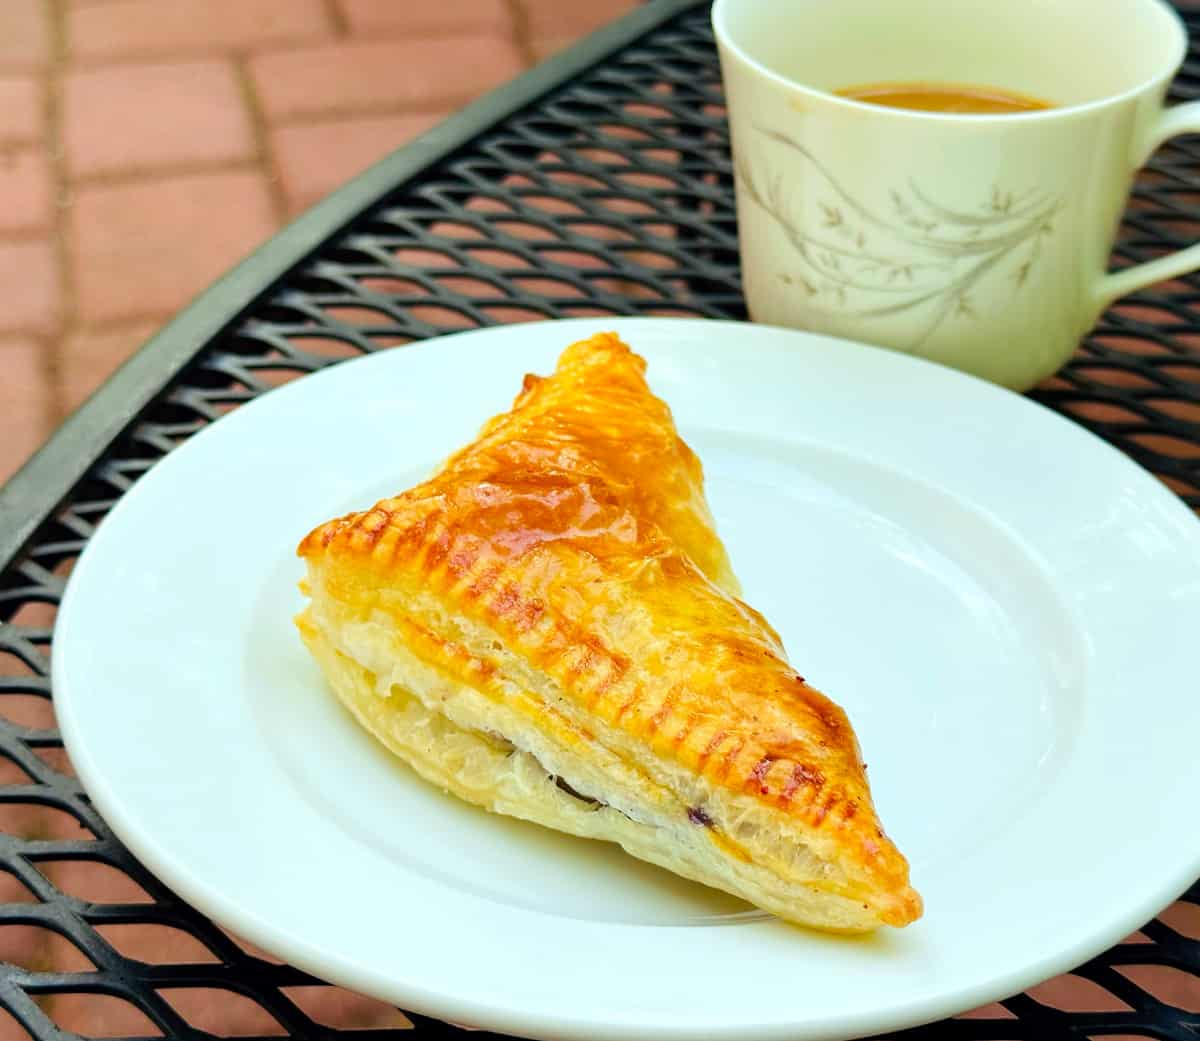 Blueberry turnover on a white plate with a cup of coffee alongside sitting on an black metal outdoor table.